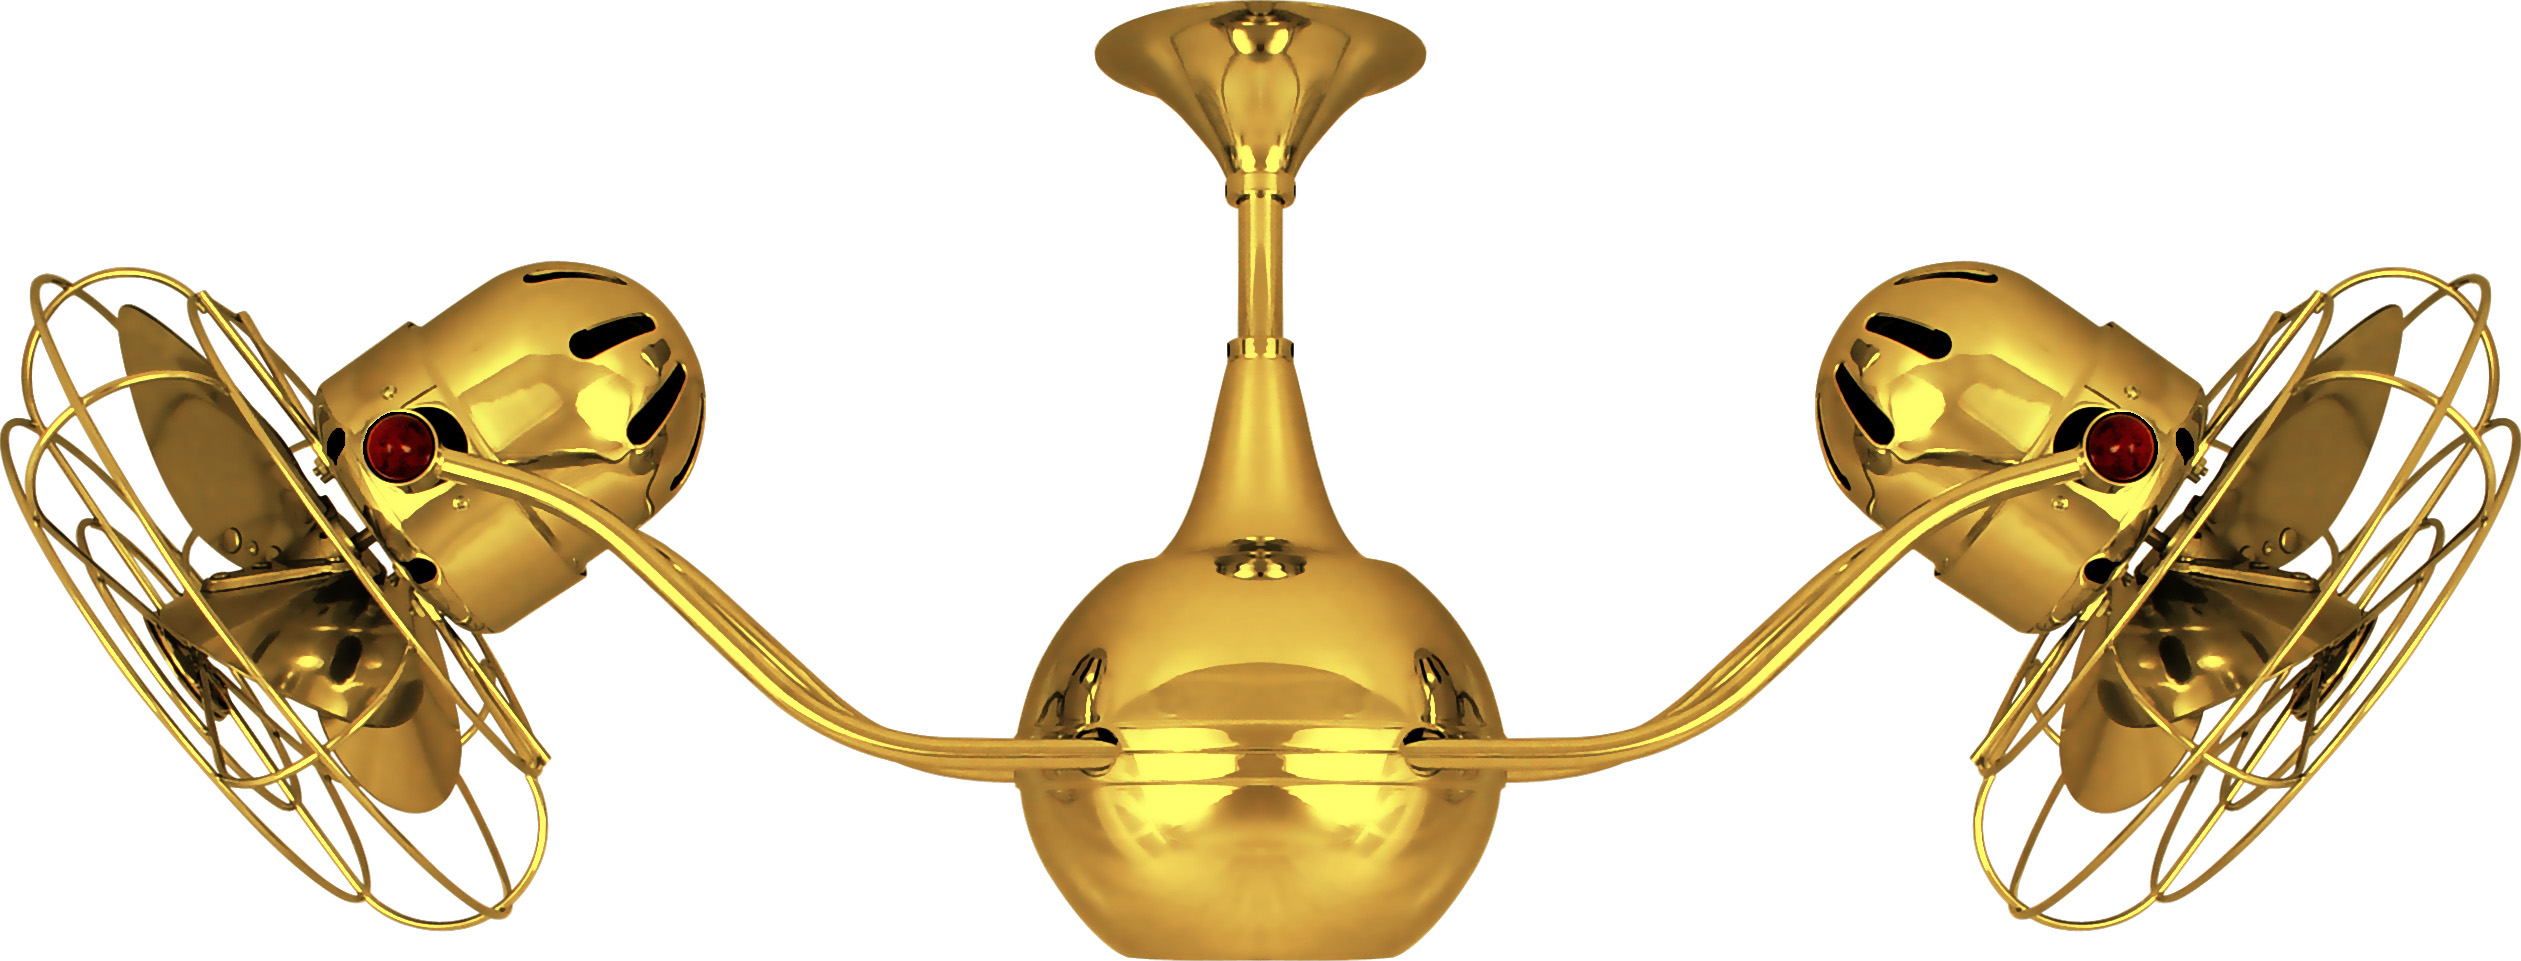 Vent-Bettina Rotational Dual Head Ceiling Fan in Ouro / Gold Finish with Metal Blades and Decorative Cage